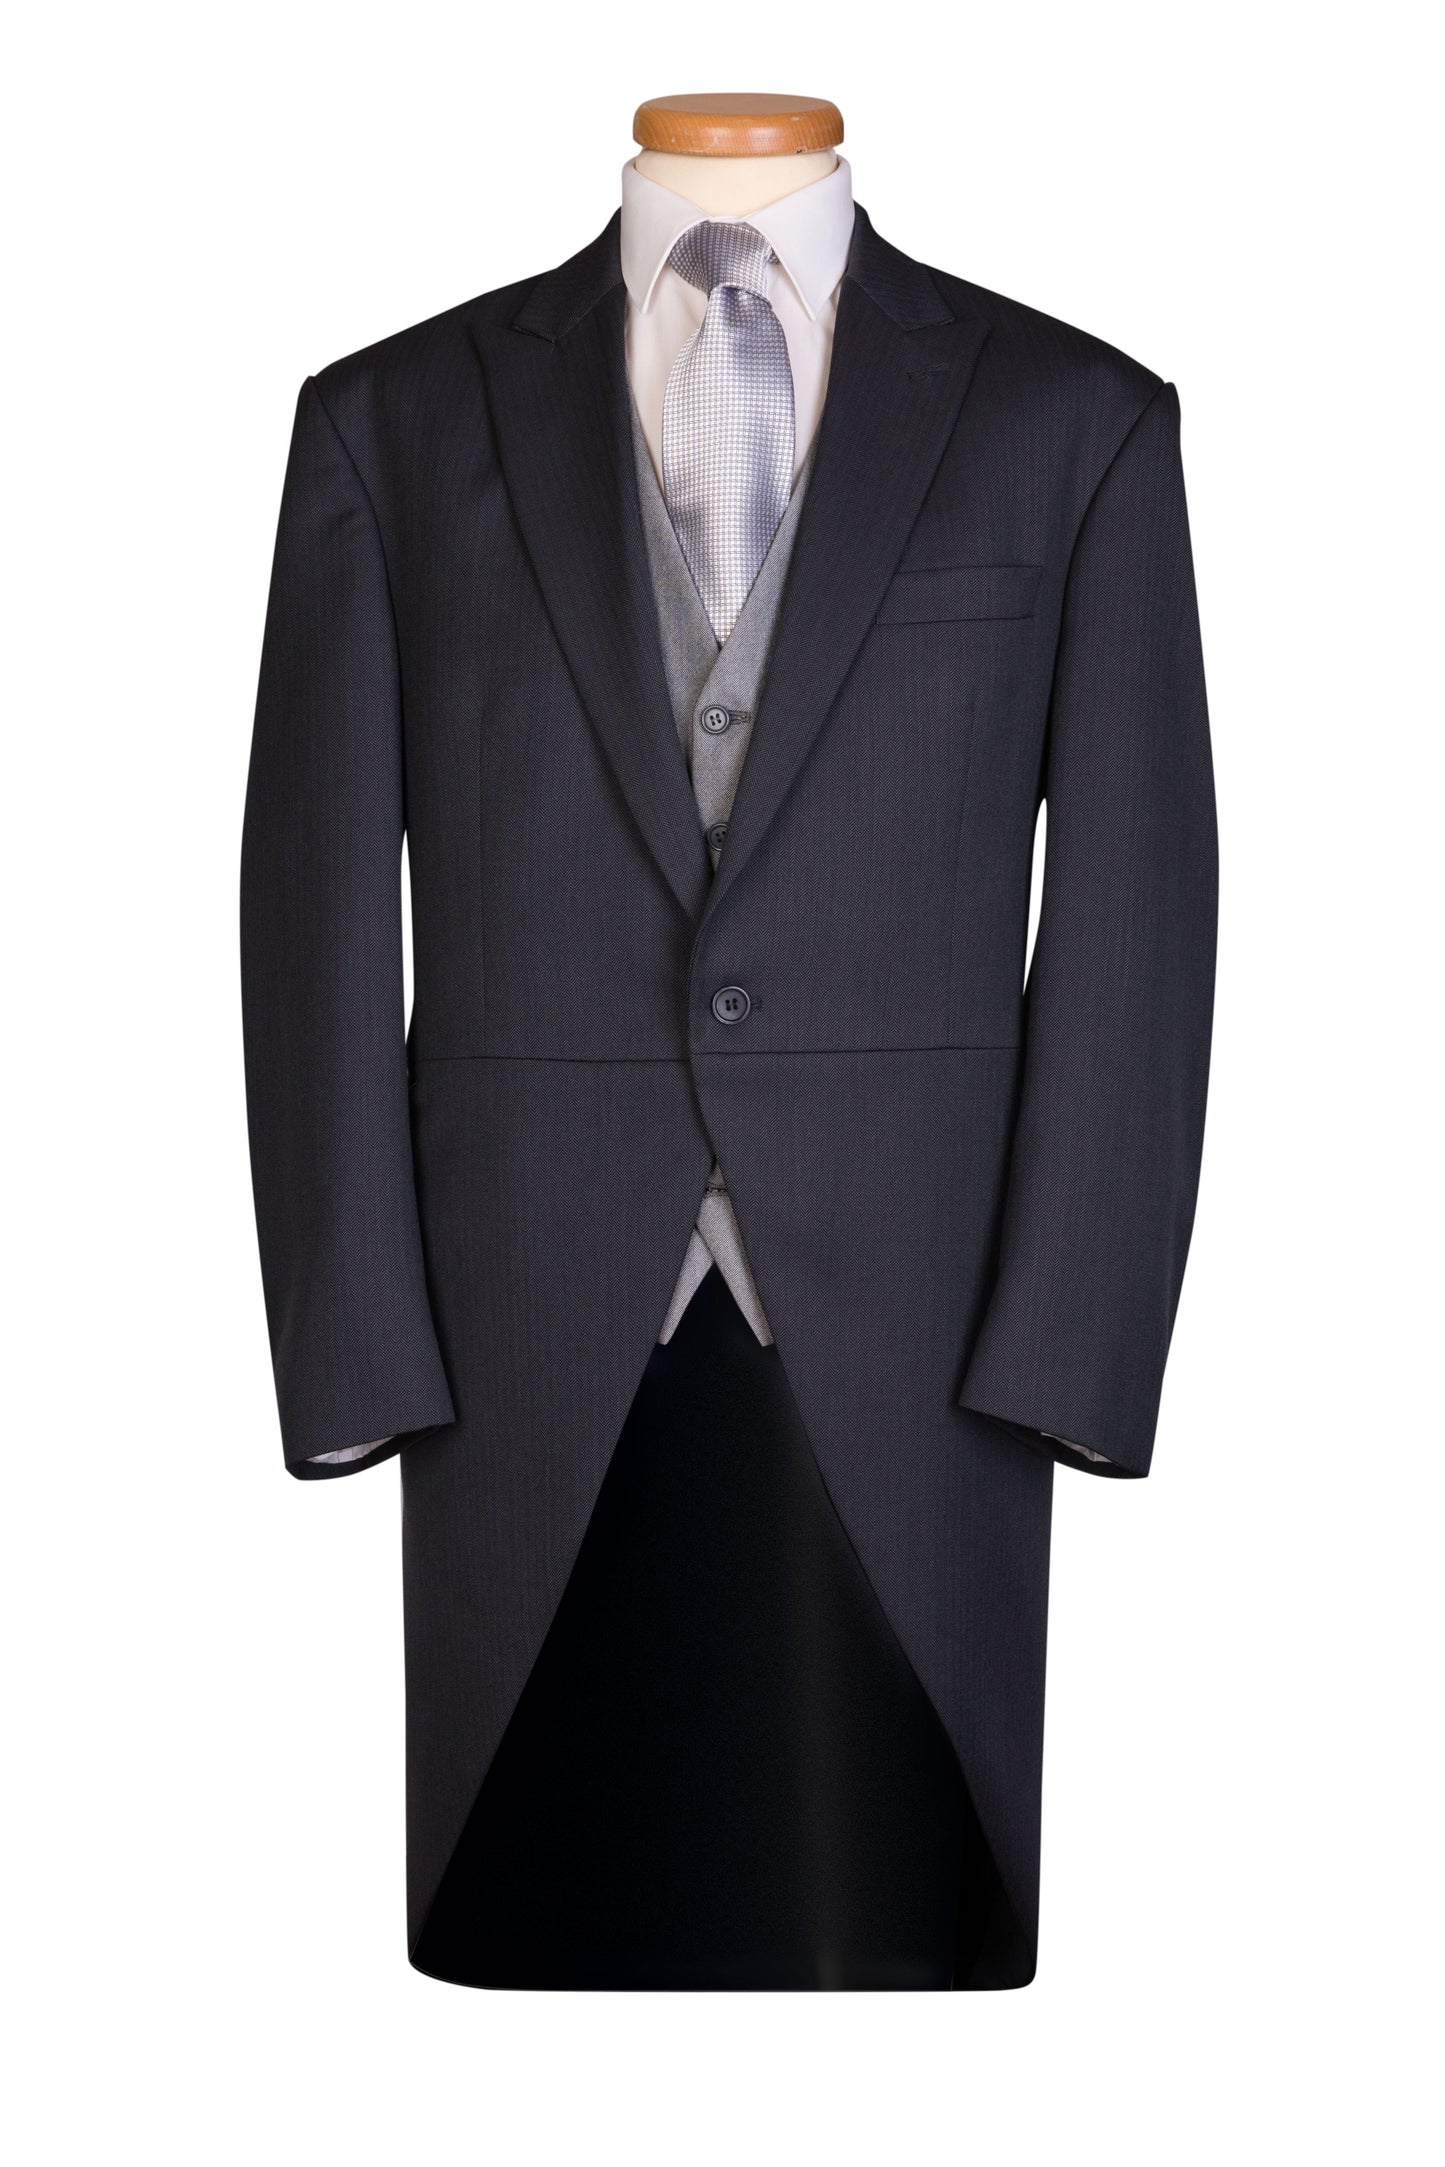 Grey 2 Piece Tailcoat Suit with Morning Trousers - Ex Hire